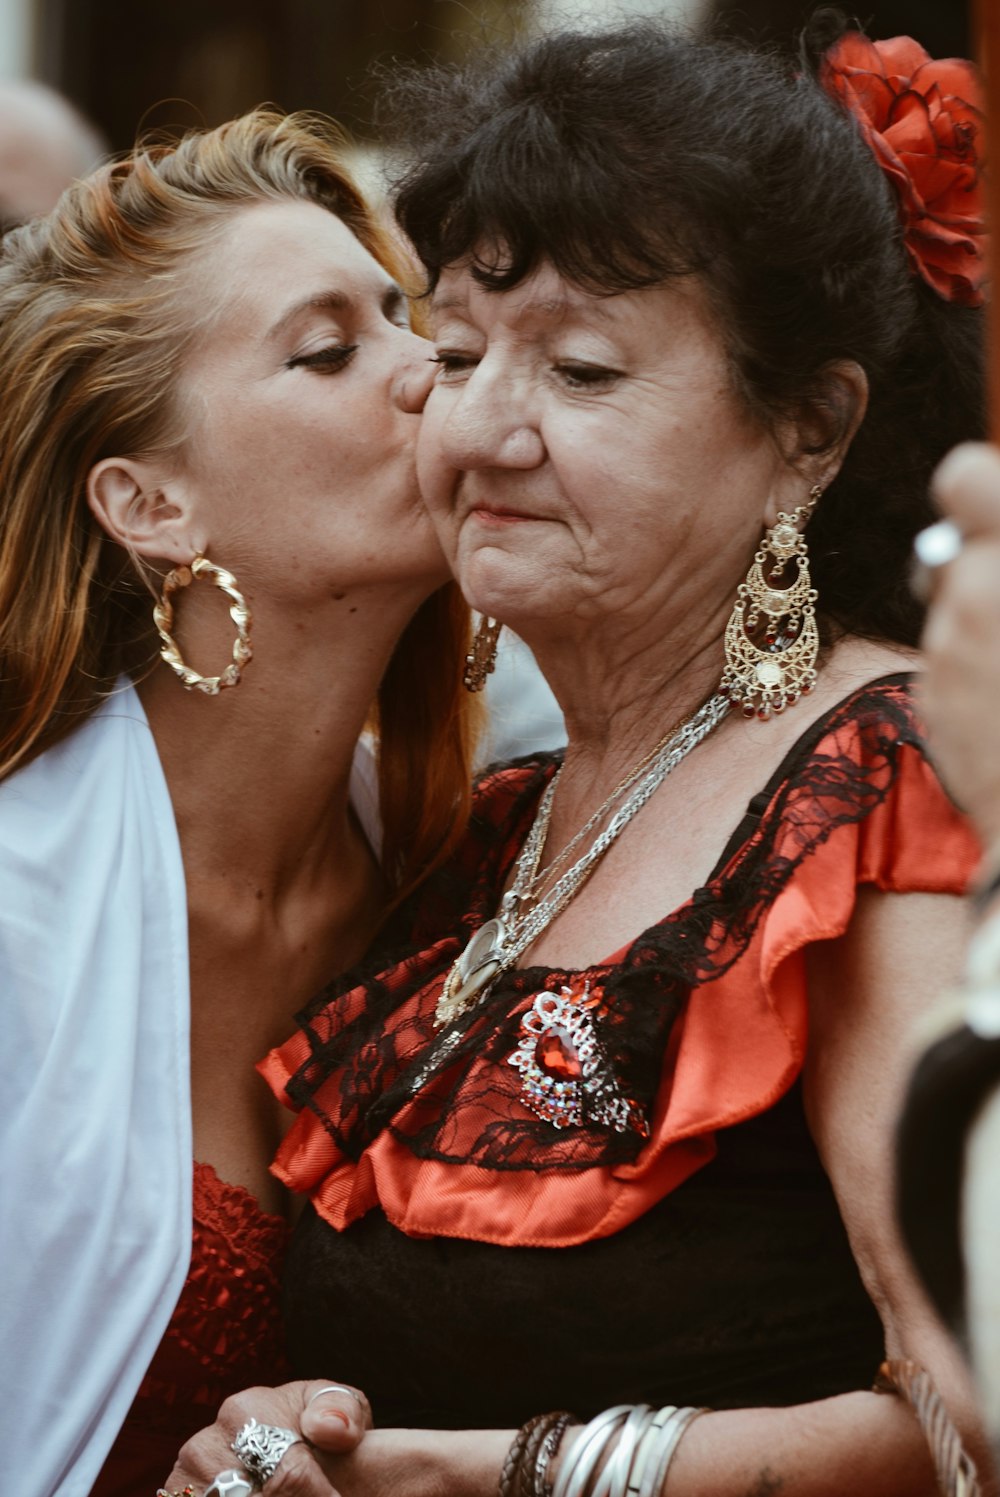 woman in red and black floral dress kissing woman in white dress